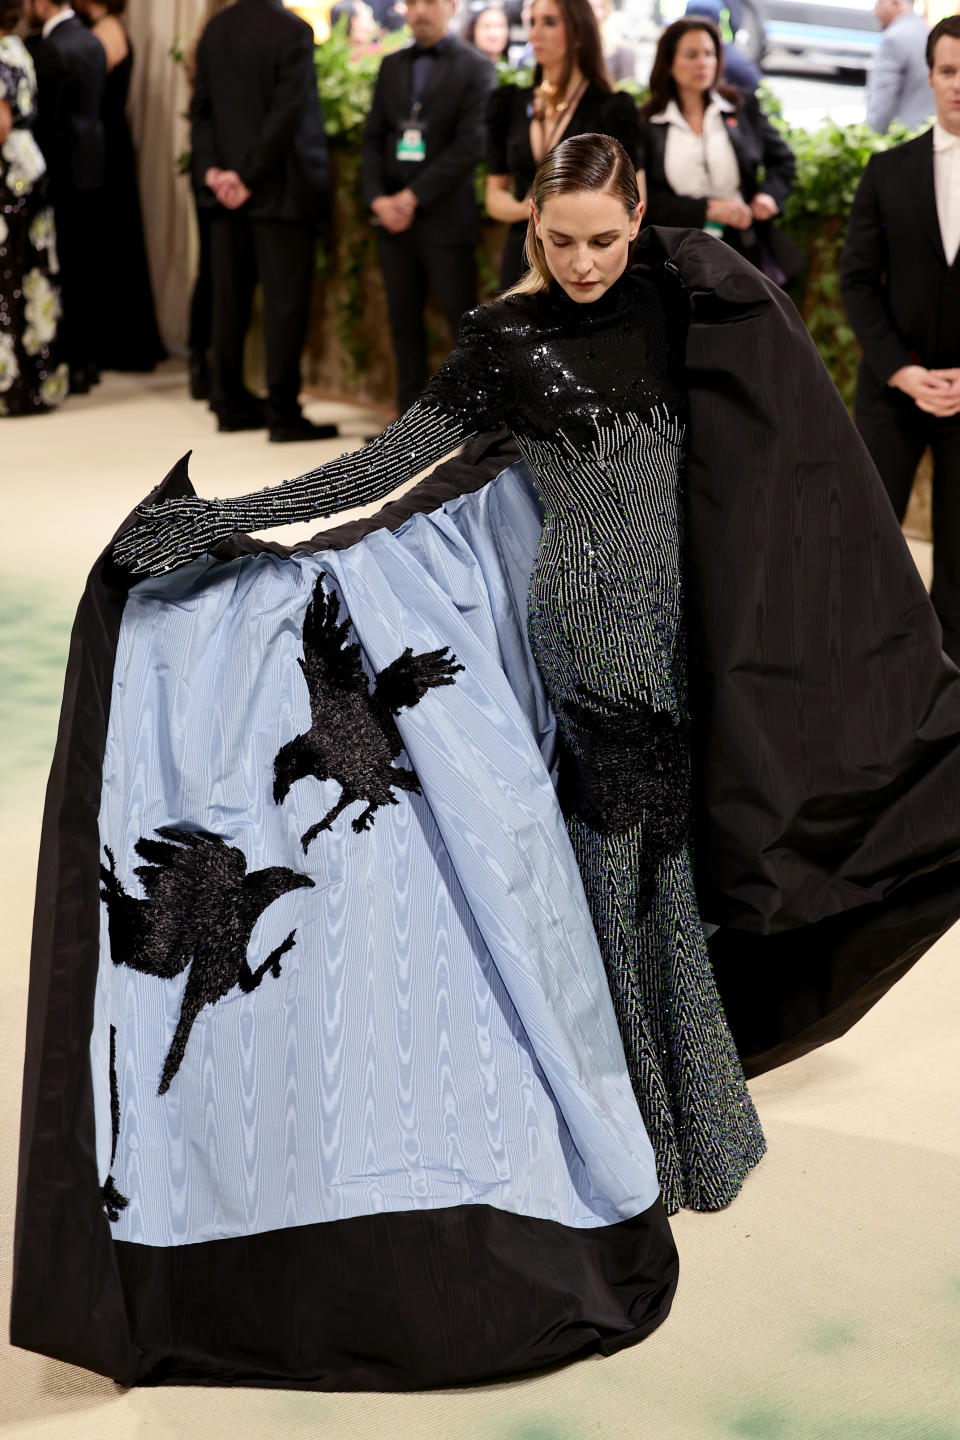 Rebecca Ferguson showing off the inside of her cape, which features two ravens